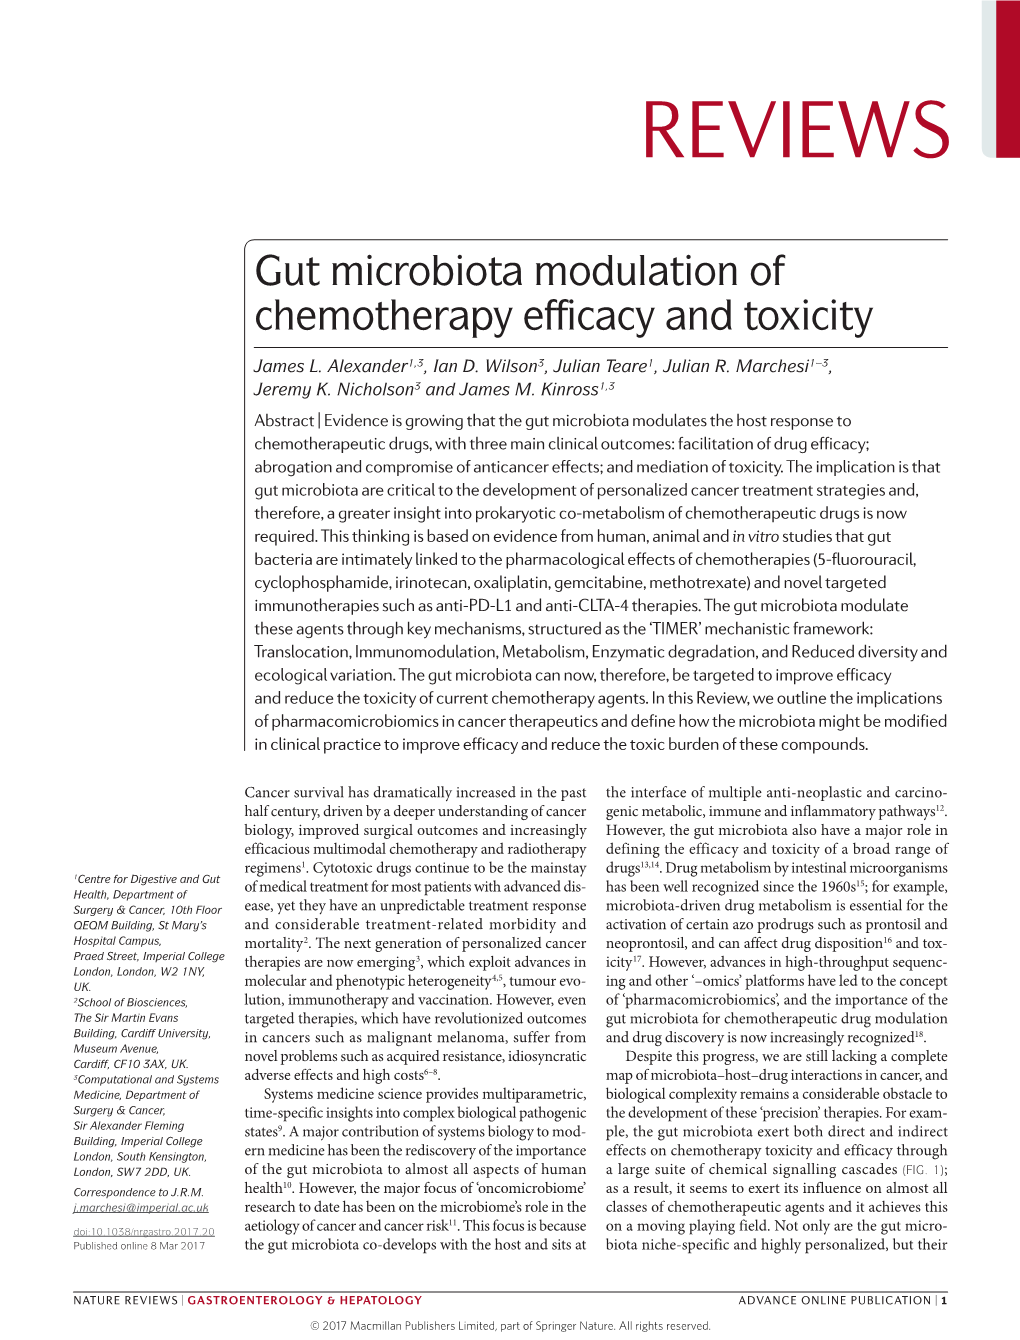 Gut Microbiota Modulation of Chemotherapy Efficacy and Toxicity